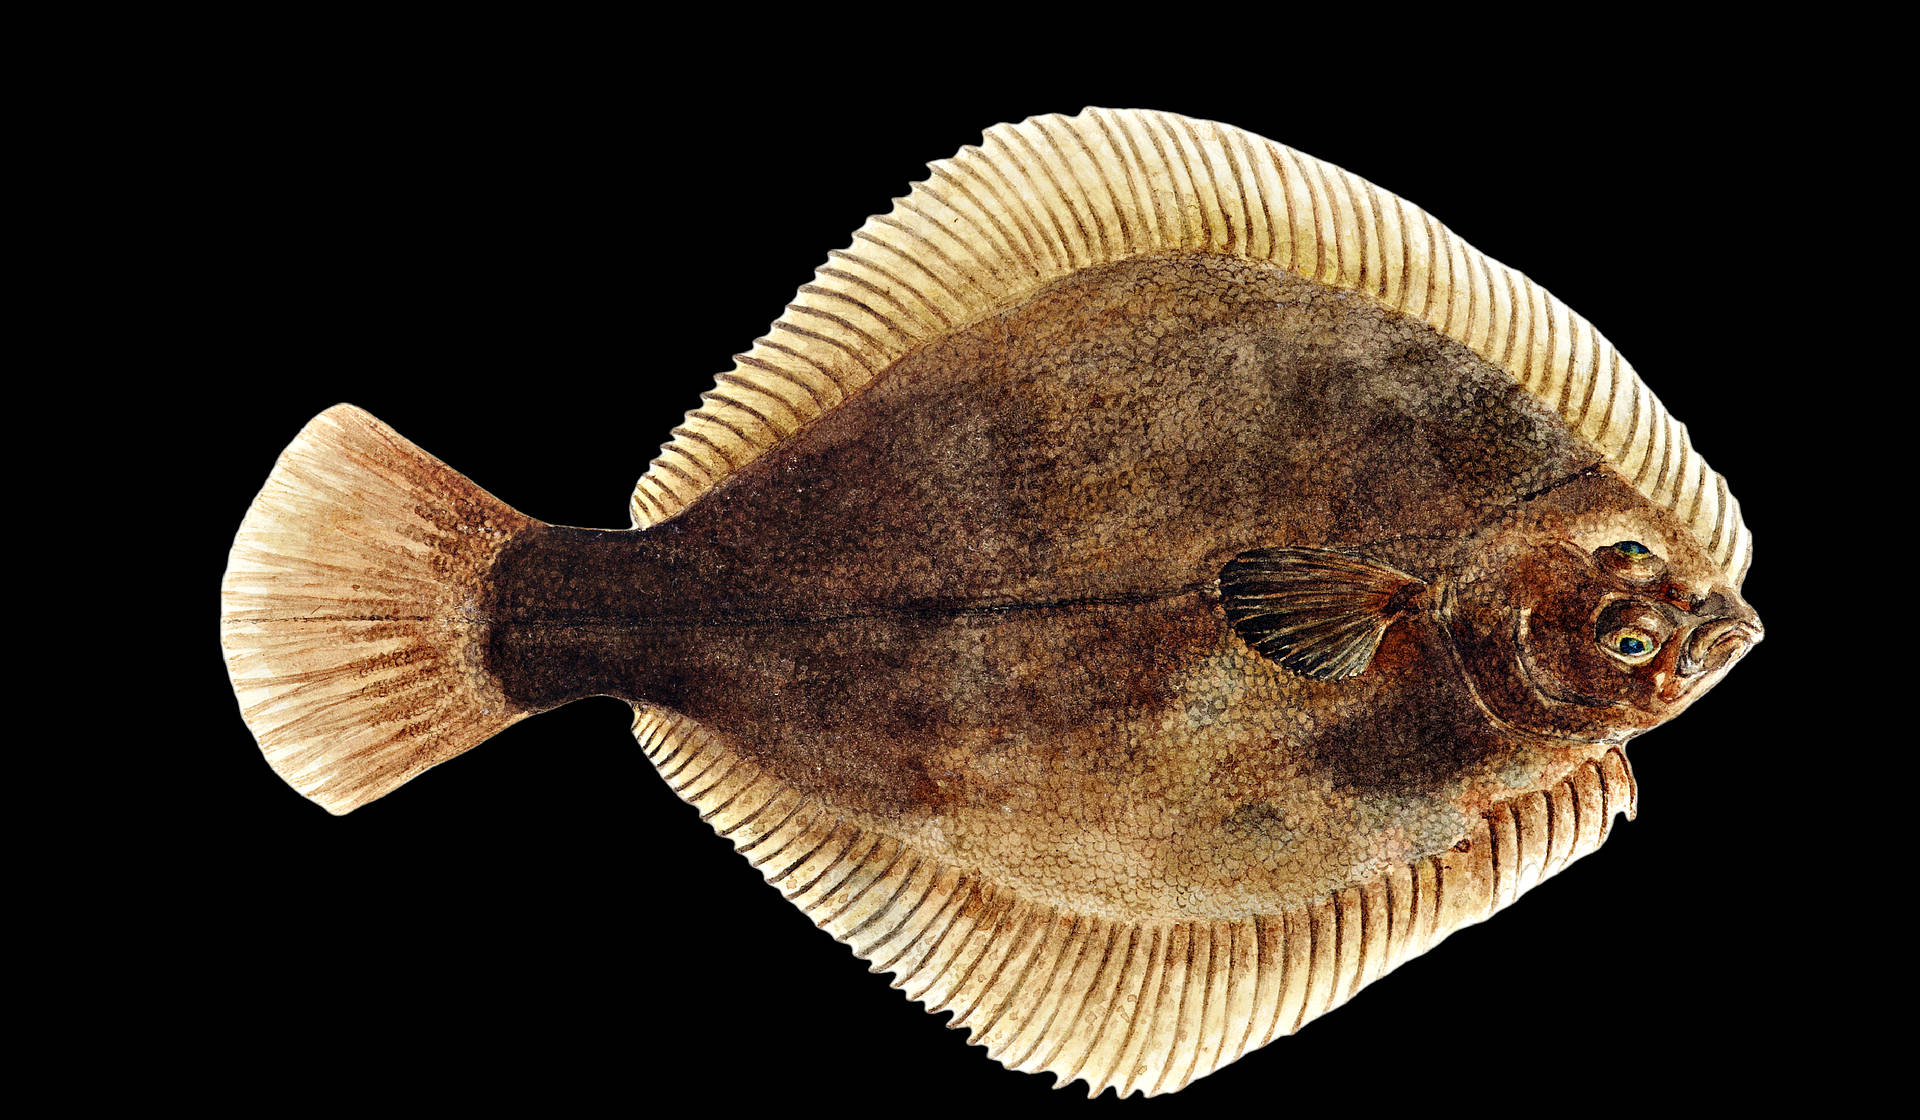 Ediblegreenback Flounder May Refer To A Type Of Flatfish That Is Commonly Consumed As Food. However, As An Ai Language Model, I Cannot Provide Real-time Translations. For Accurate Translations, I Recommend Using A Reliable Online Translation Tool Or Consulting With A Professional Translator. Sfondo